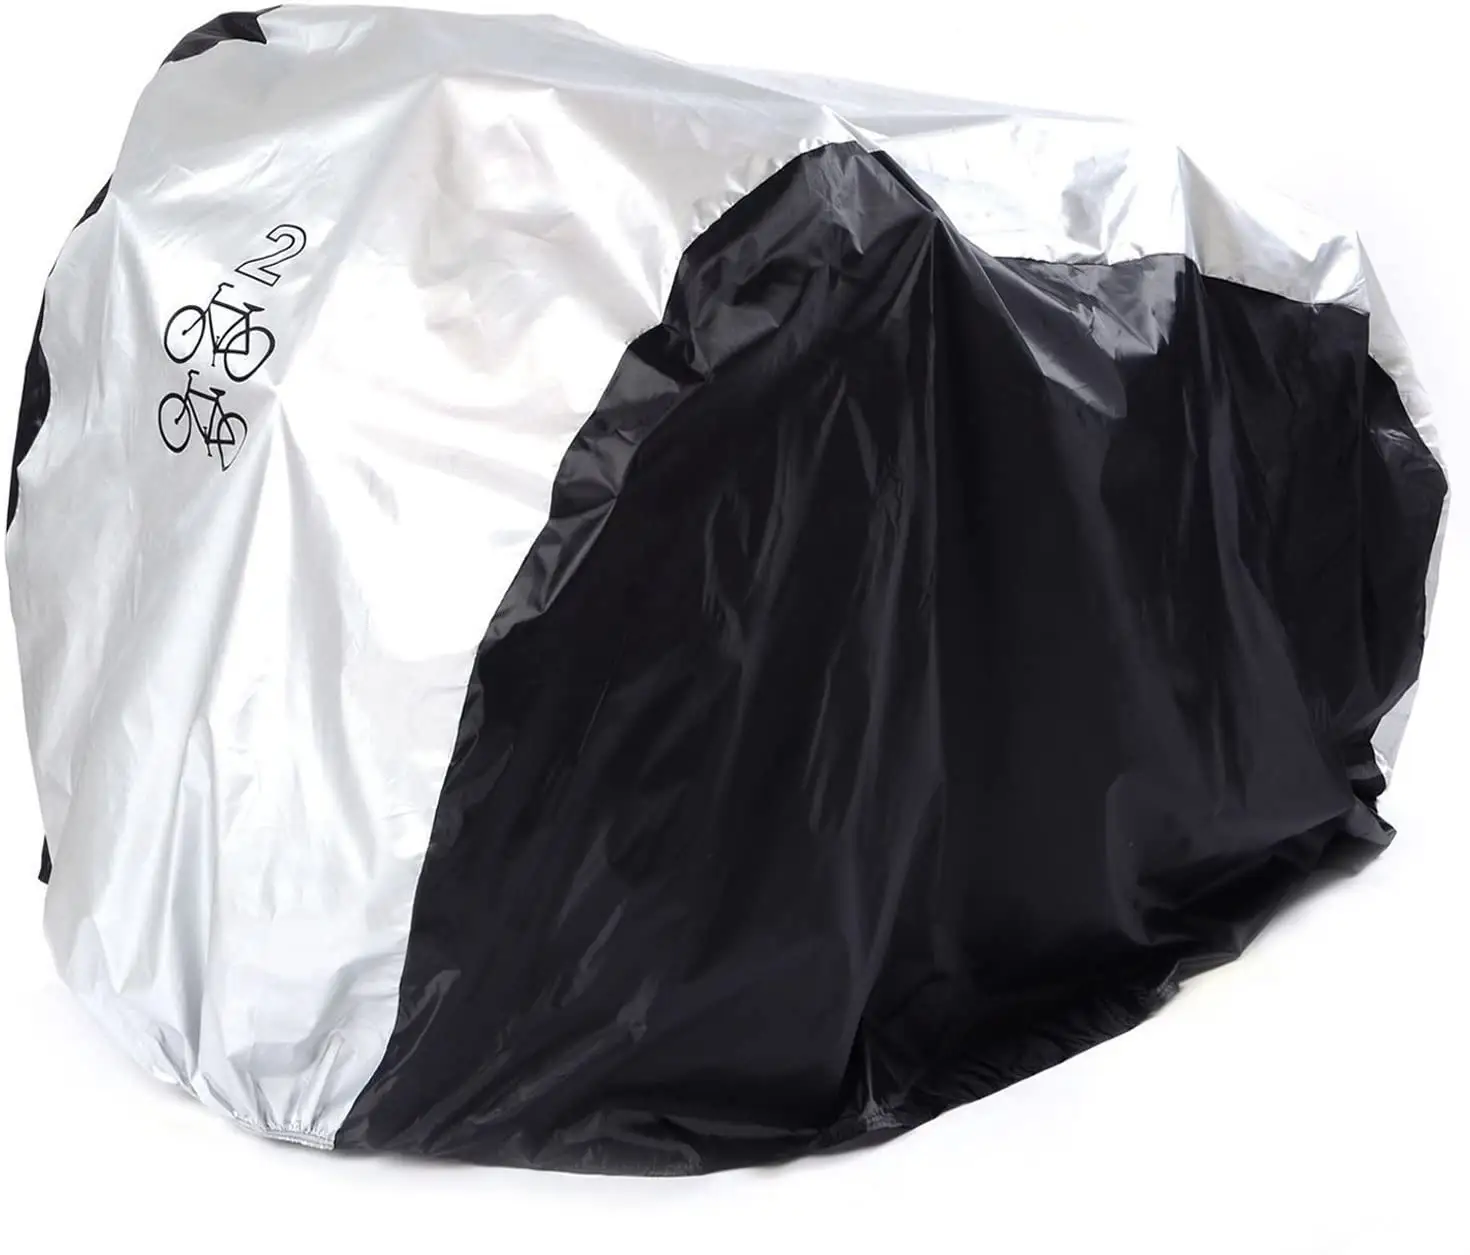 2 Bicycles Rain Cover Waterproof Cycle Bike Accessories Outdoor Dust Resistant UV Protection Road Bicycle Covers